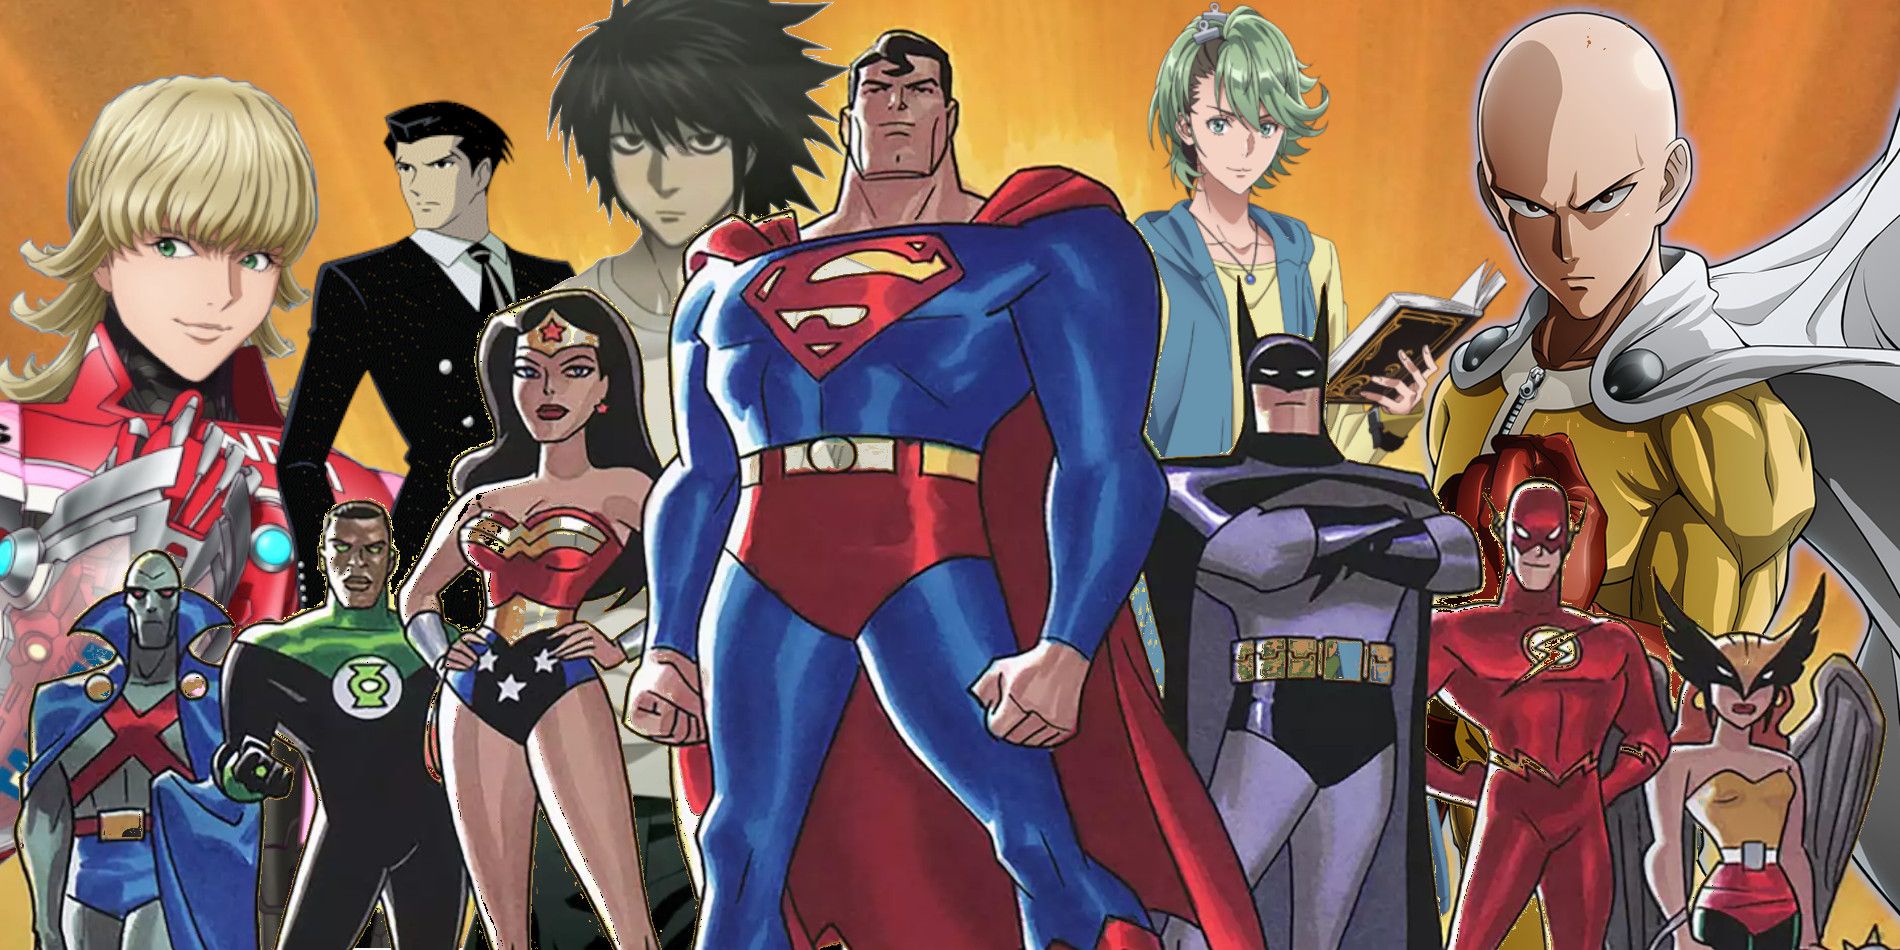 WIT Studios Wants to Make More DC Anime